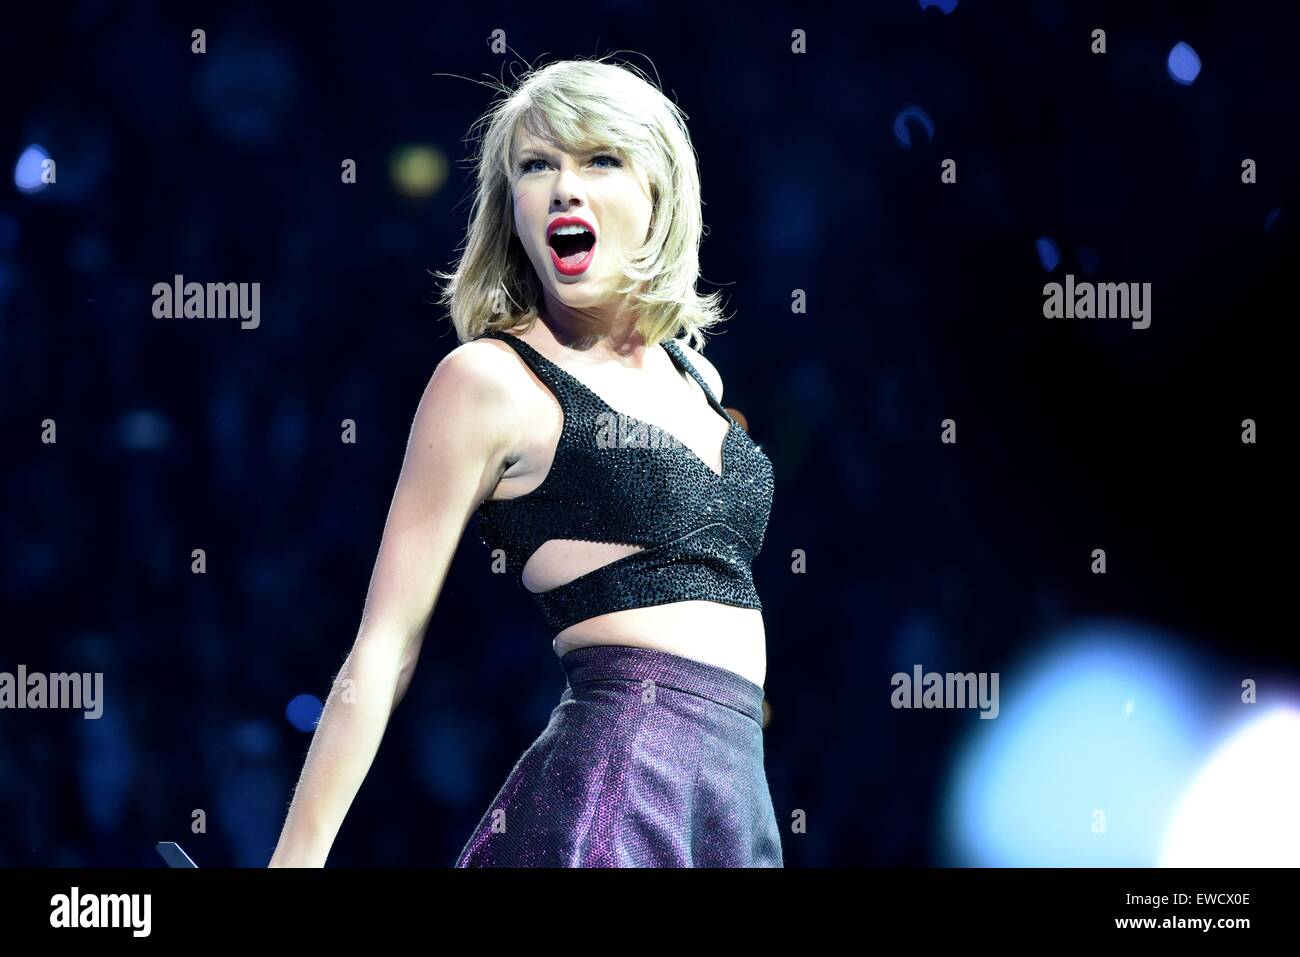 Cologne, Germany. 19th June, 2015. US singer Taylor Swift performs on stage in Cologne, Germany, 19 June 2015. Photo: JAN KNOFF/dpa - NO WIRE SERVICE -/dpa/Alamy Live News Stock Photo